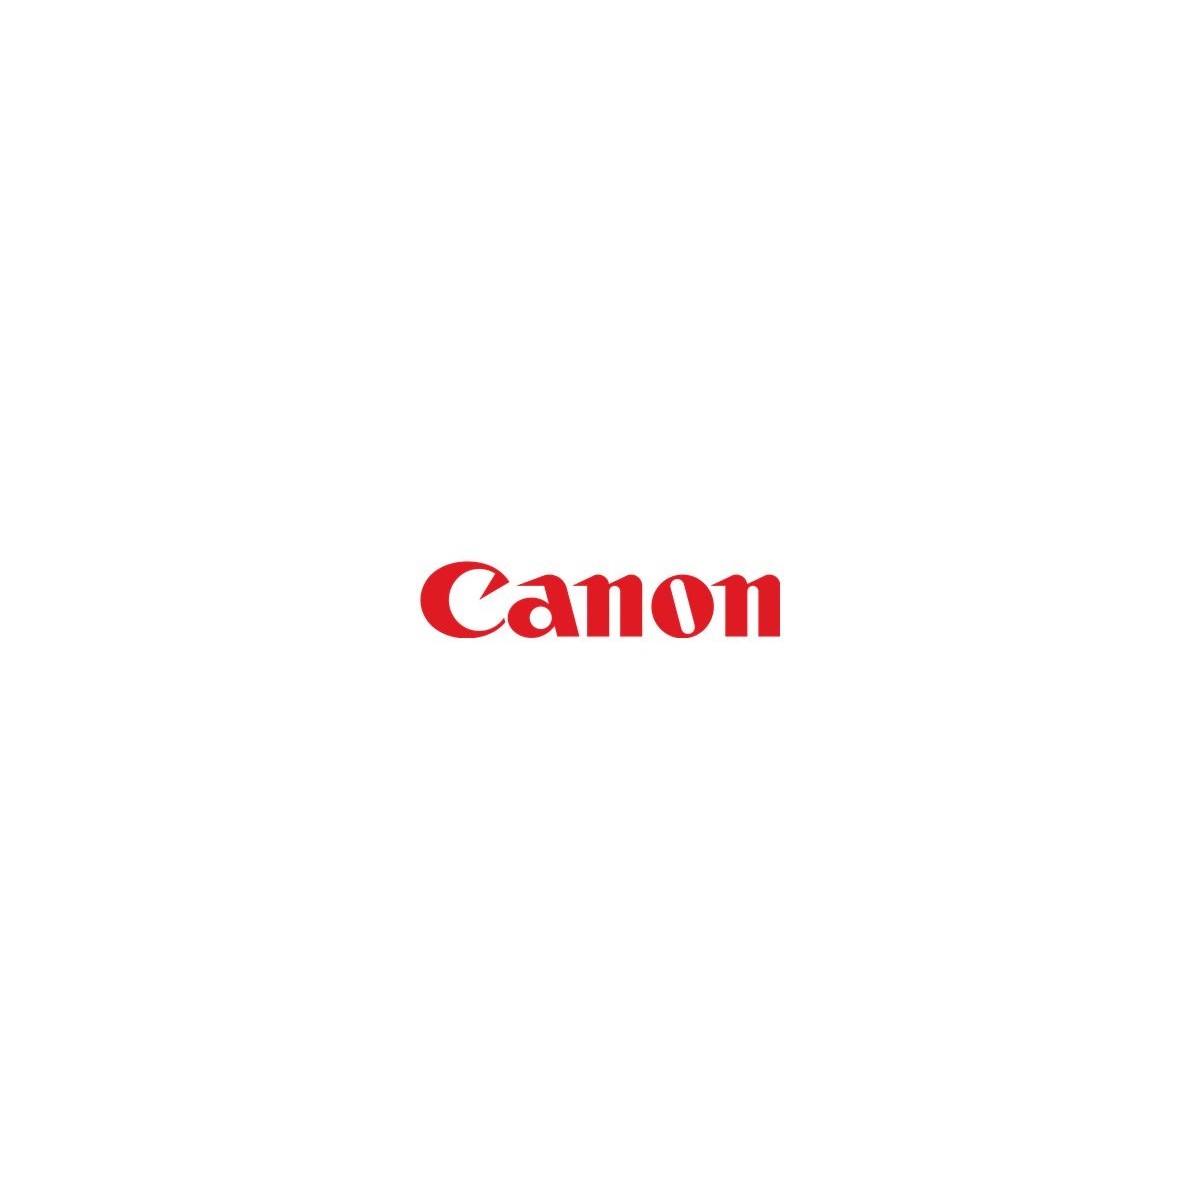 Canon Flatbed Scanner Unit FB 102 A4